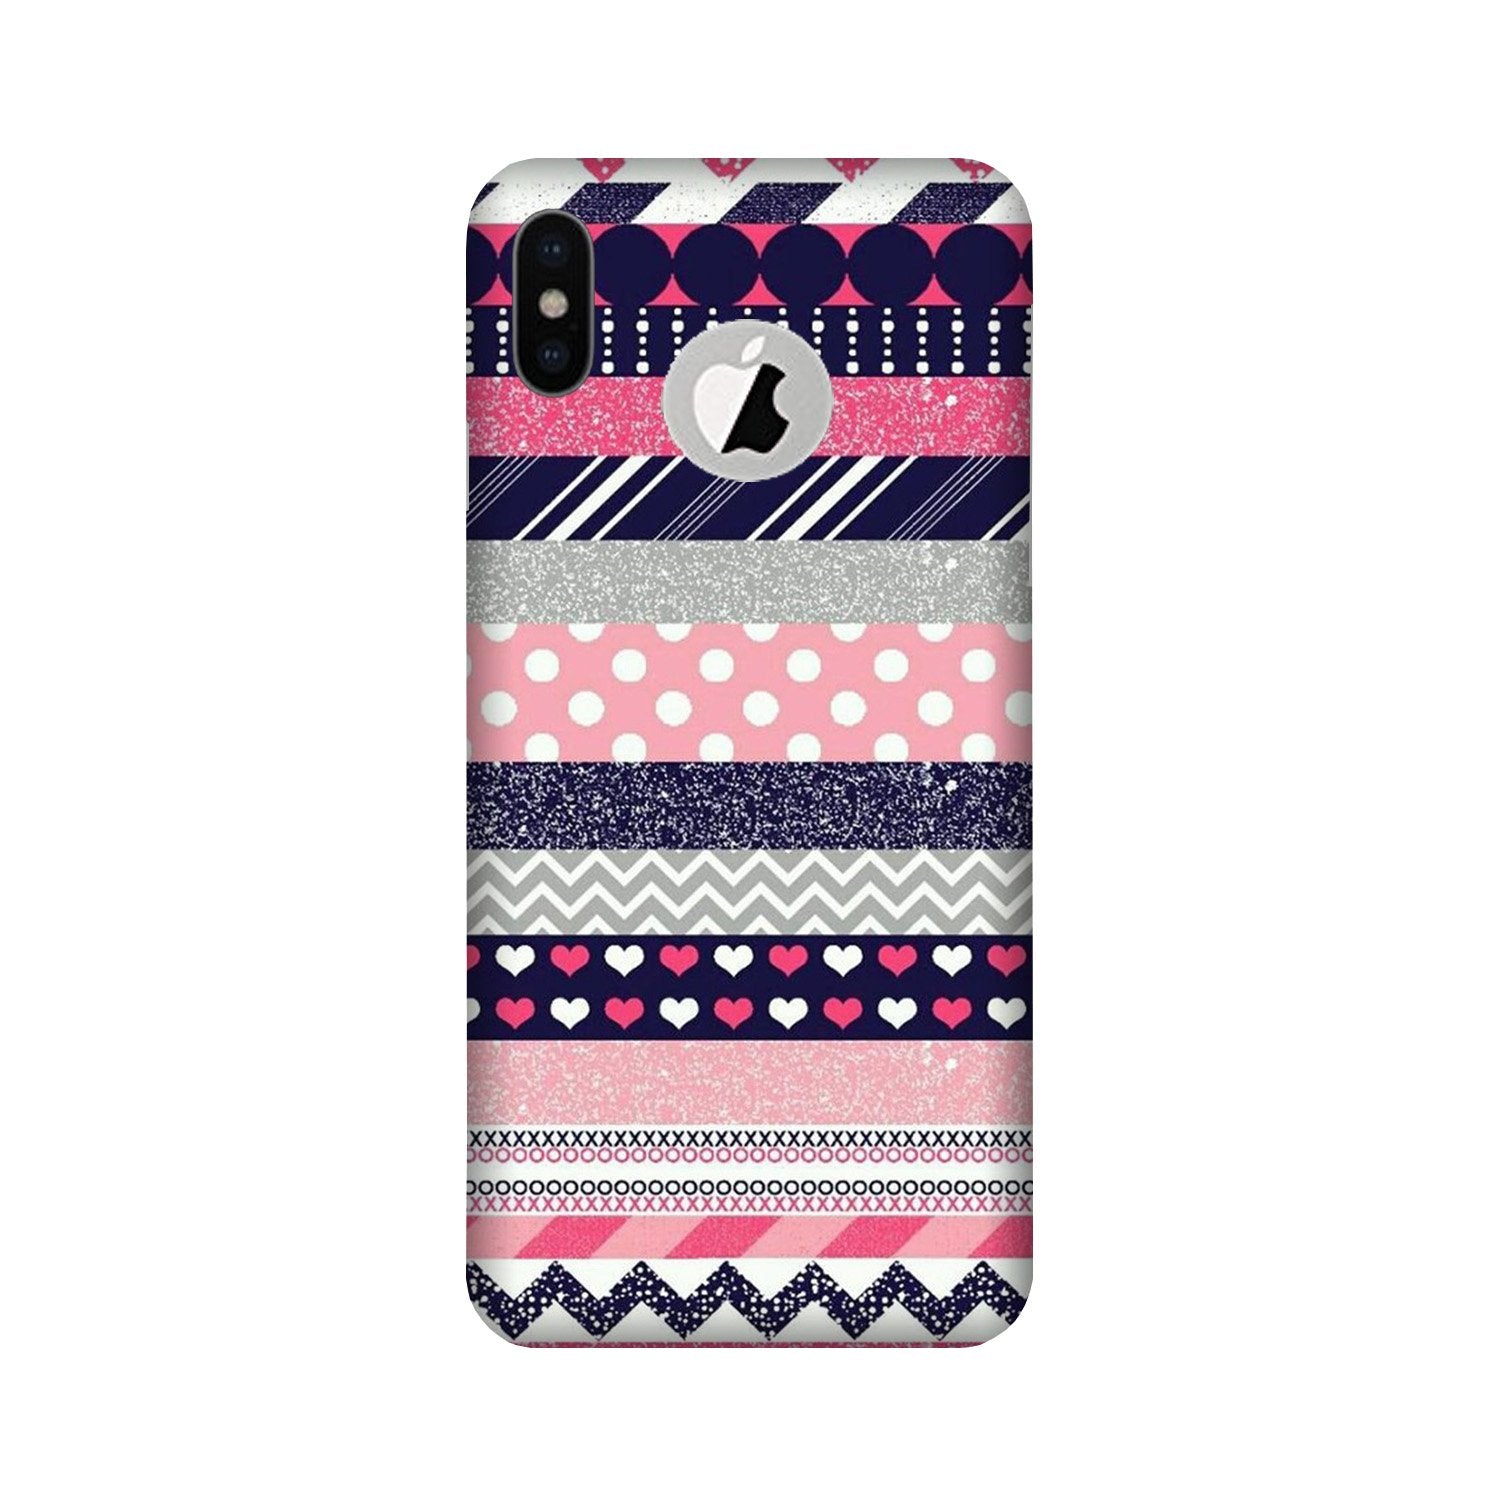 Pattern3 Case for iPhone X logo cut